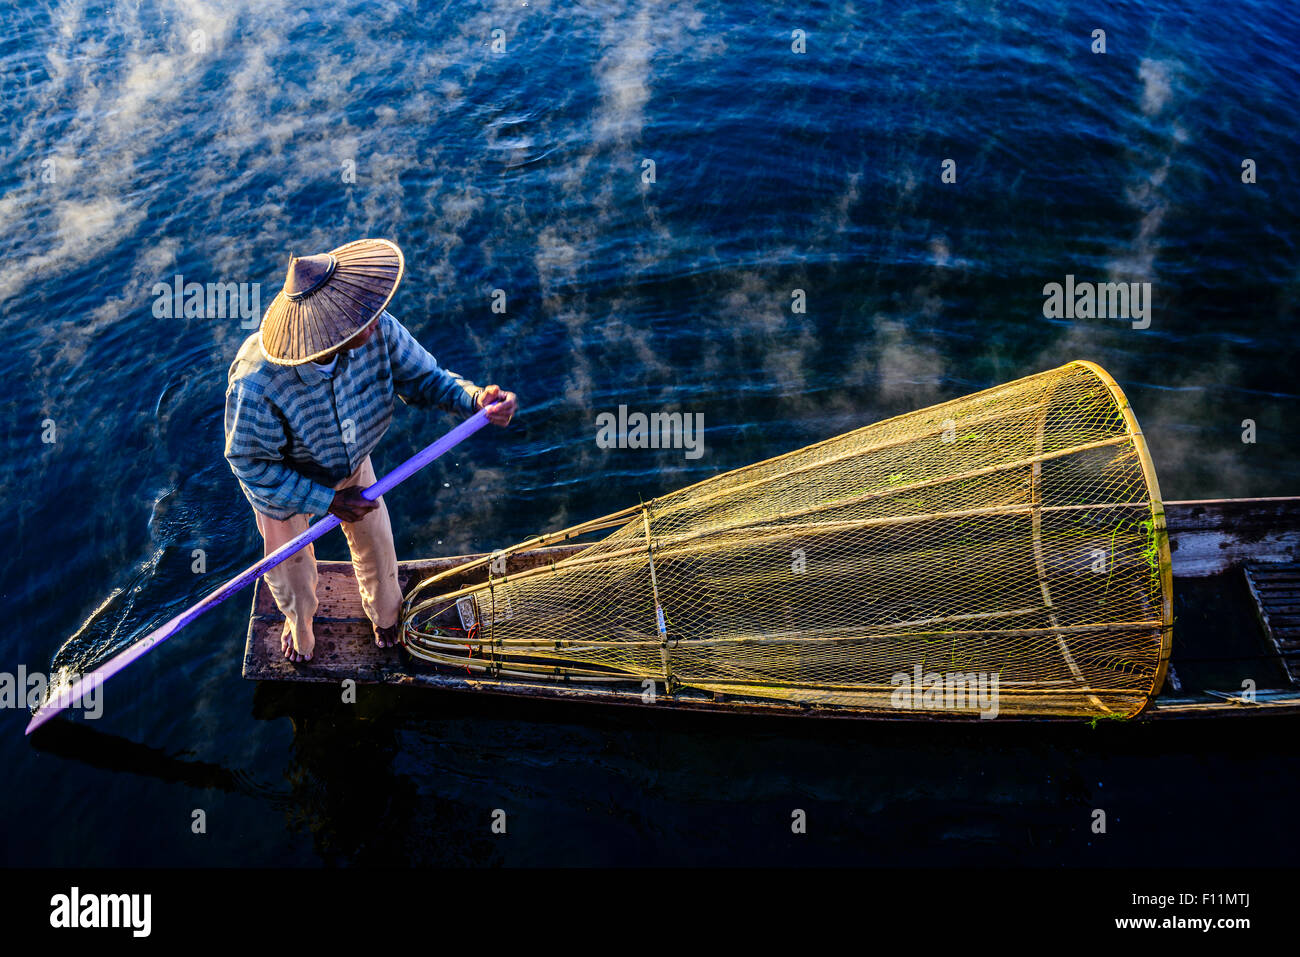 High angle view of Asian fisherman using fishing net in canoe on river Stock Photo